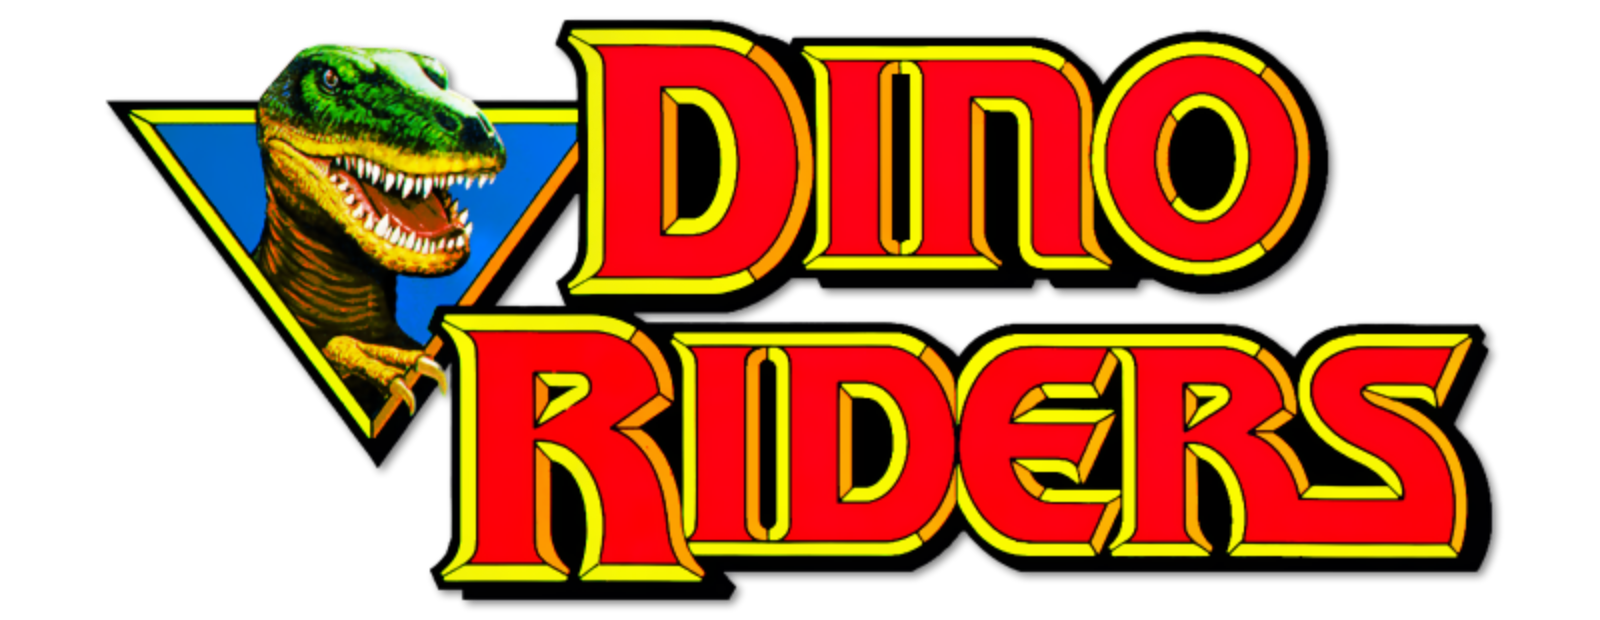 Dino-Riders Complete (2 DVDs Box Set)